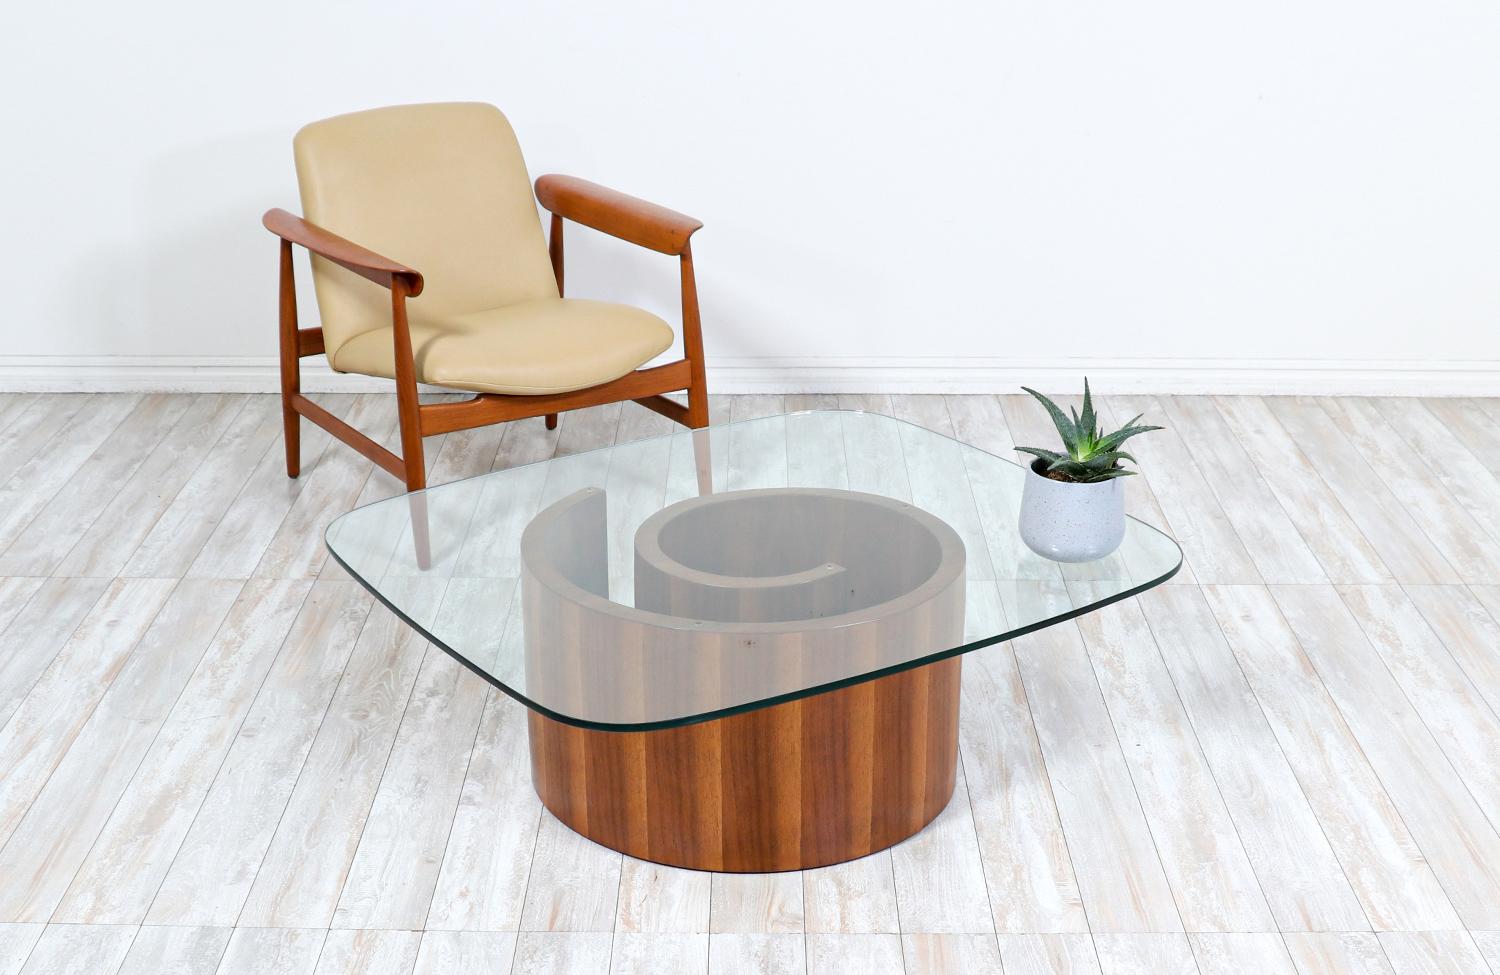 Iconic coffee table designed by German-born architect and furniture designer Vladimir Kagan for Selig in the 1960’s. Relocated to America, Kagan’s vision was to make furniture pleasant to the eye as well as comfortable. The clean spiral lines of its